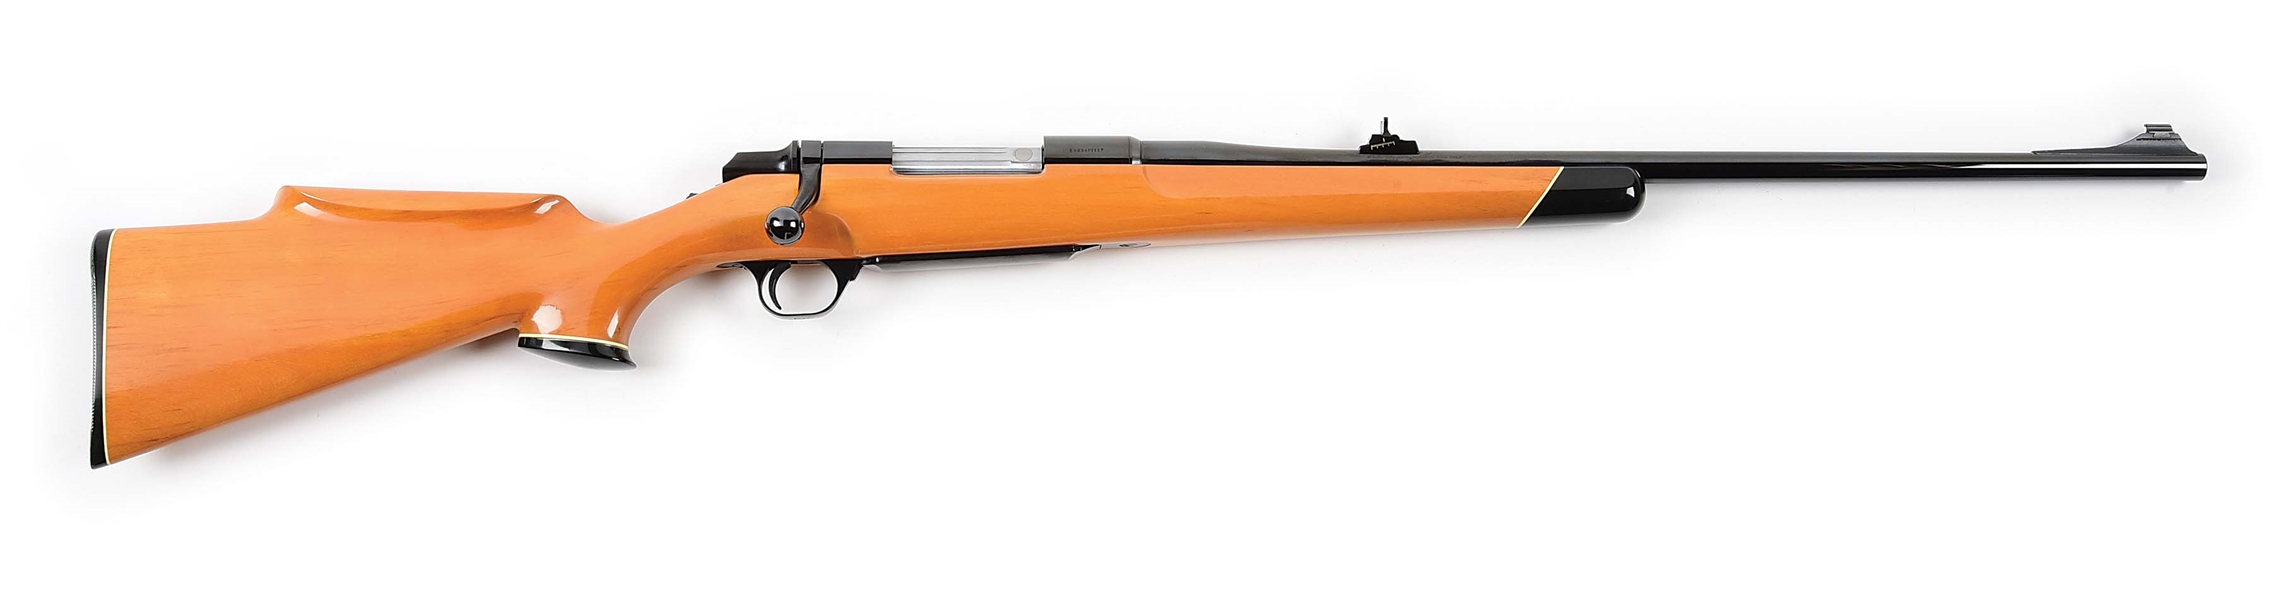 (M) BROWNING BBR BOLT ACTION RIFLE WITH BRISTLE CONE (PINE) STOCK.